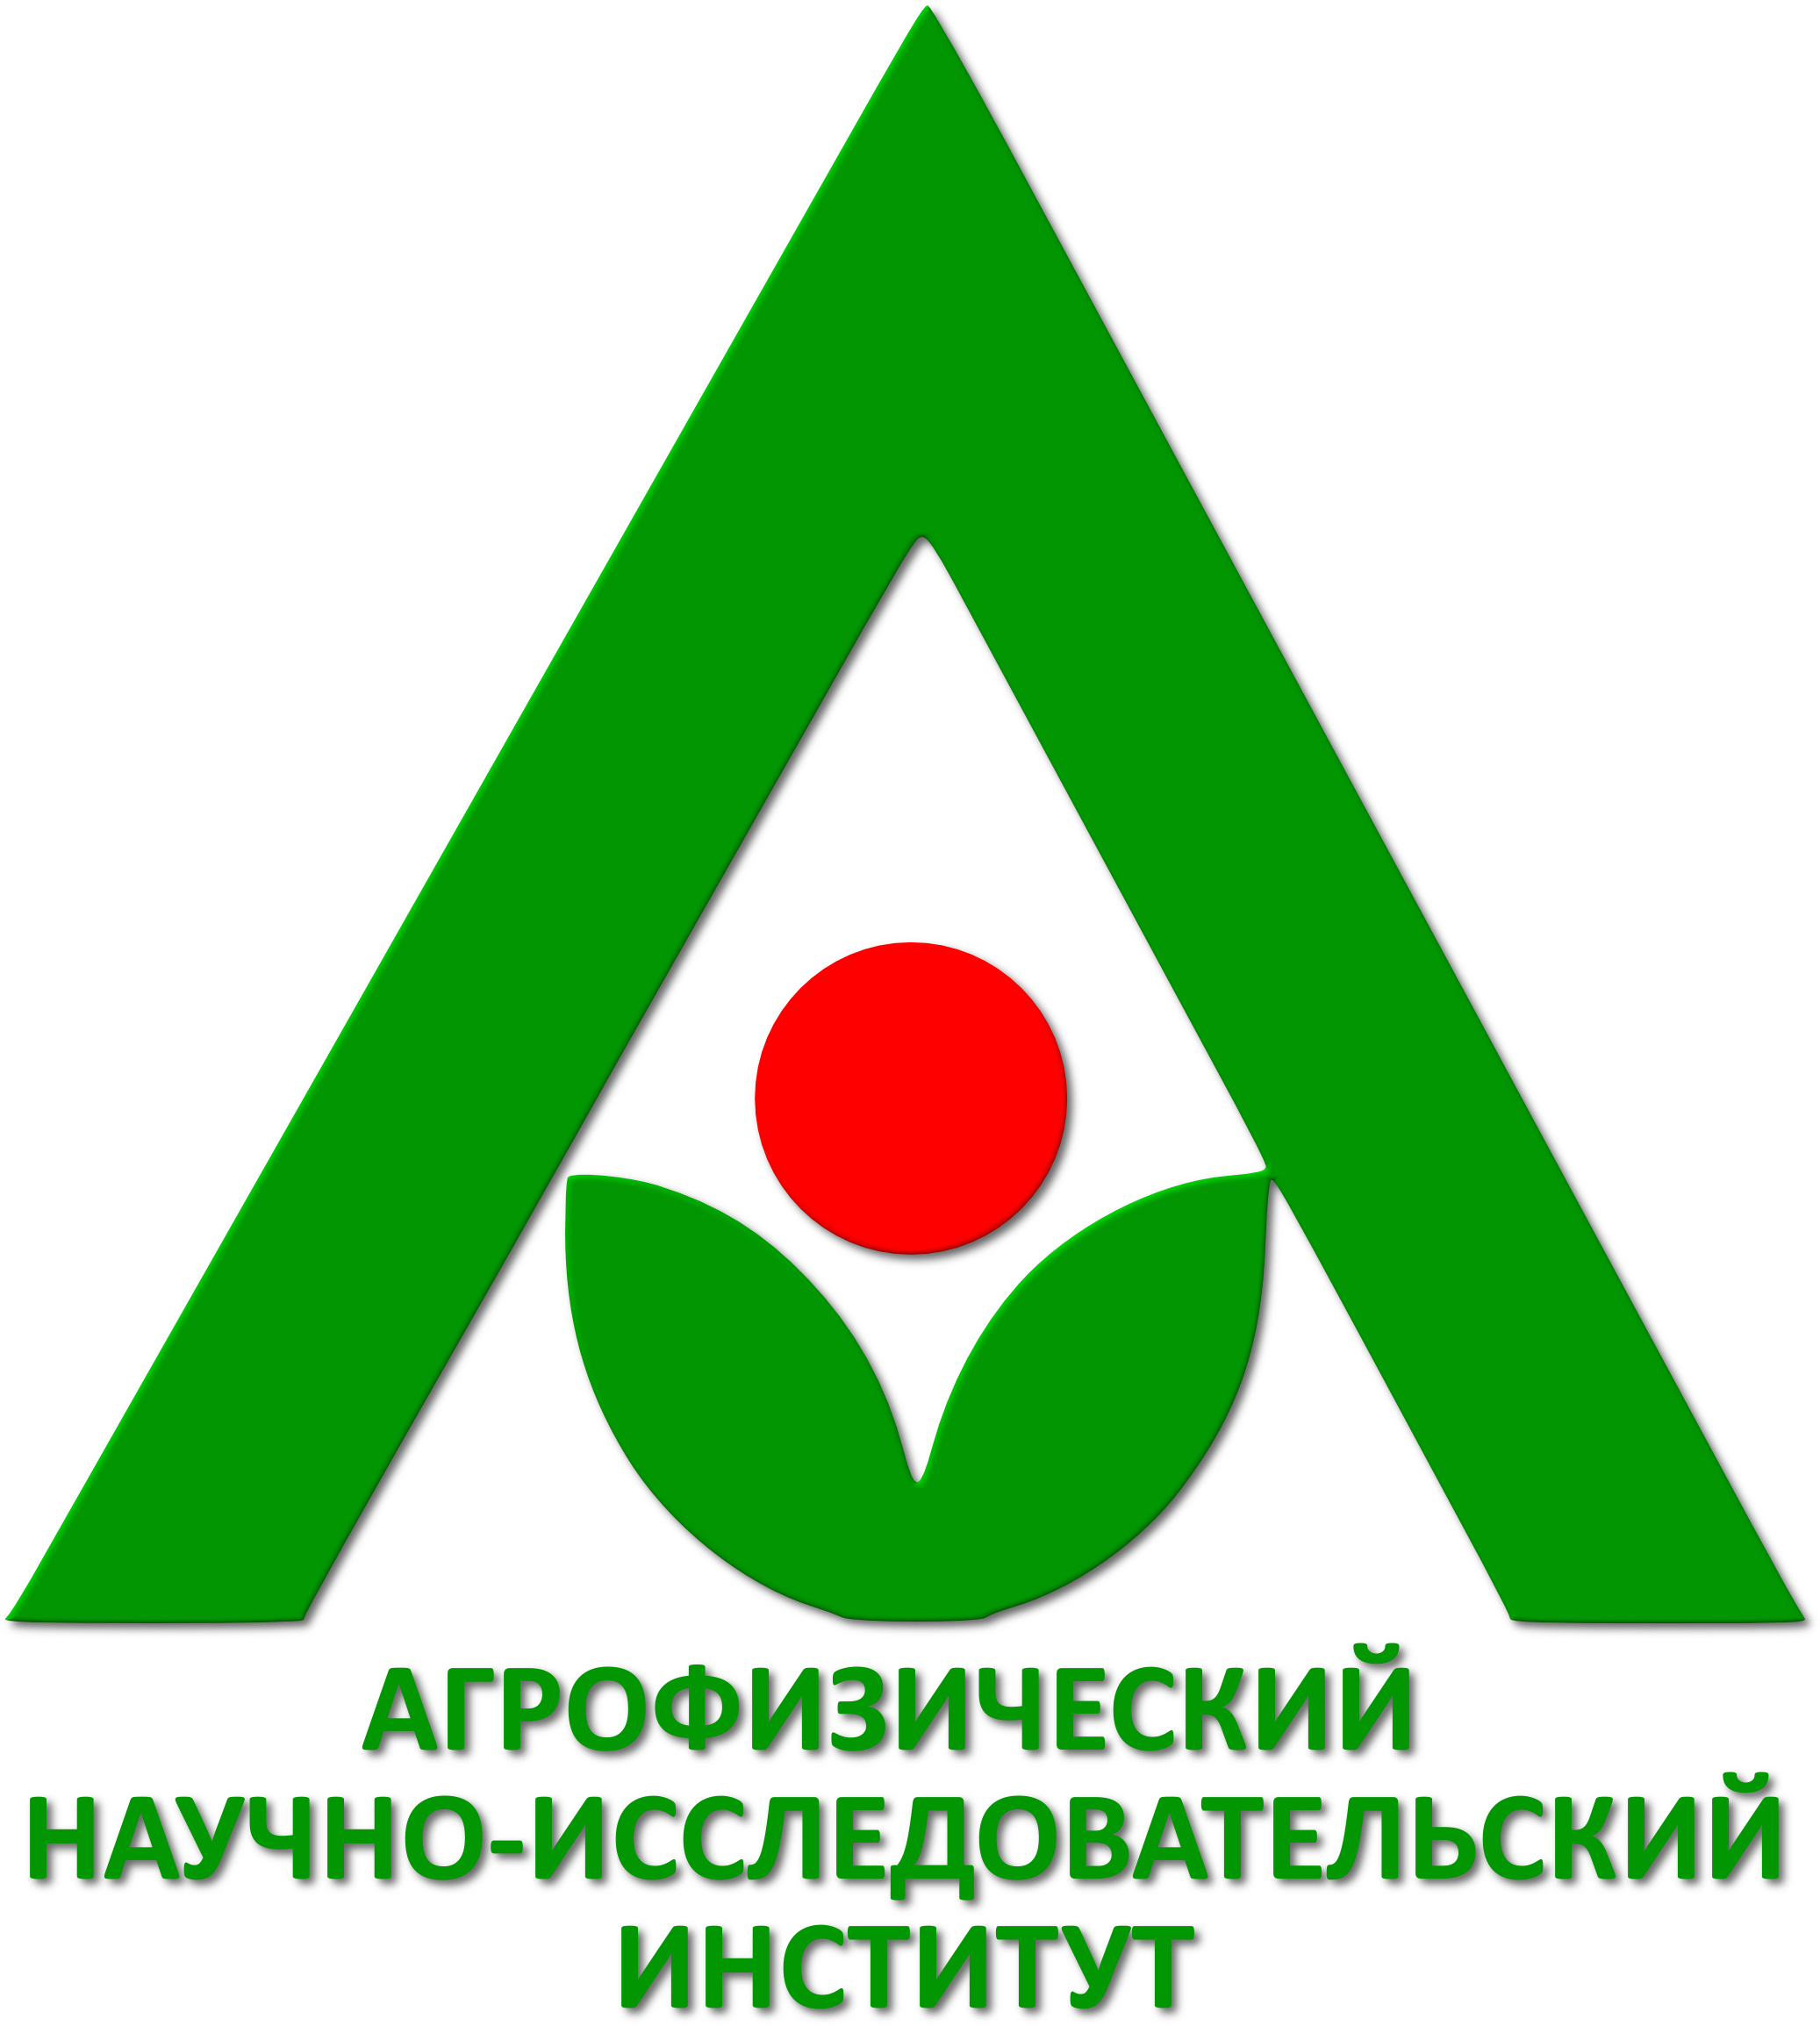 The Agrophysical Research Insitute , Russia, Has An - Logo (2088x2328)